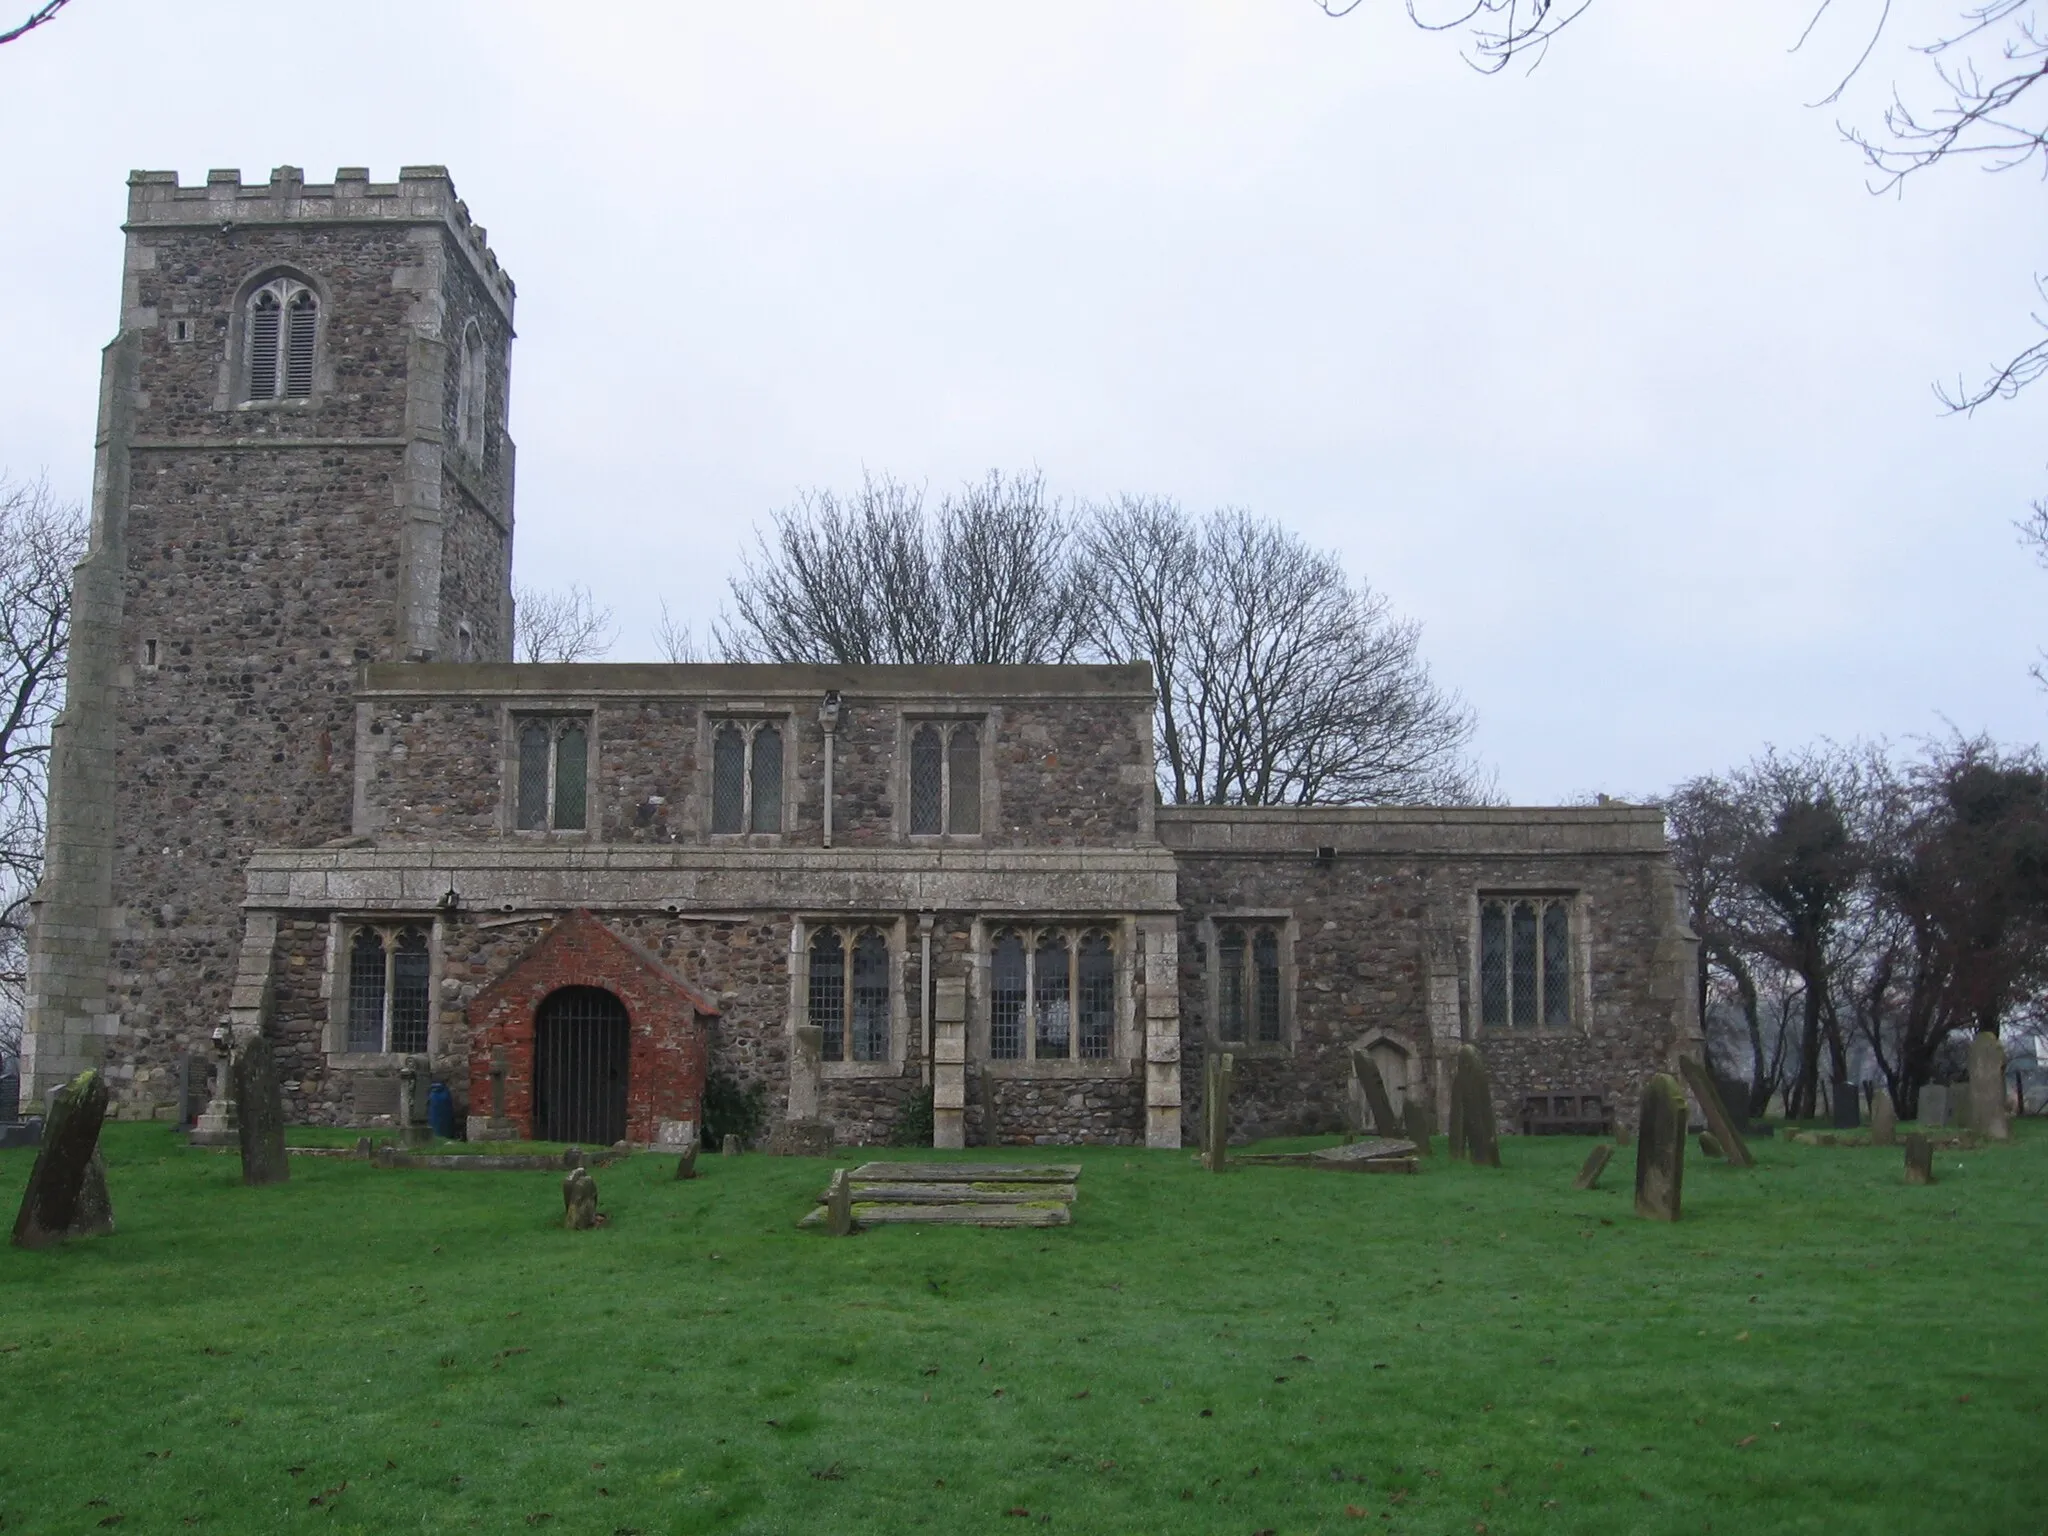 Photo showing: St Helen's Church, Skeffling, East Riding of Yorkshire, England. Photo taken by me on 22 December 2006.